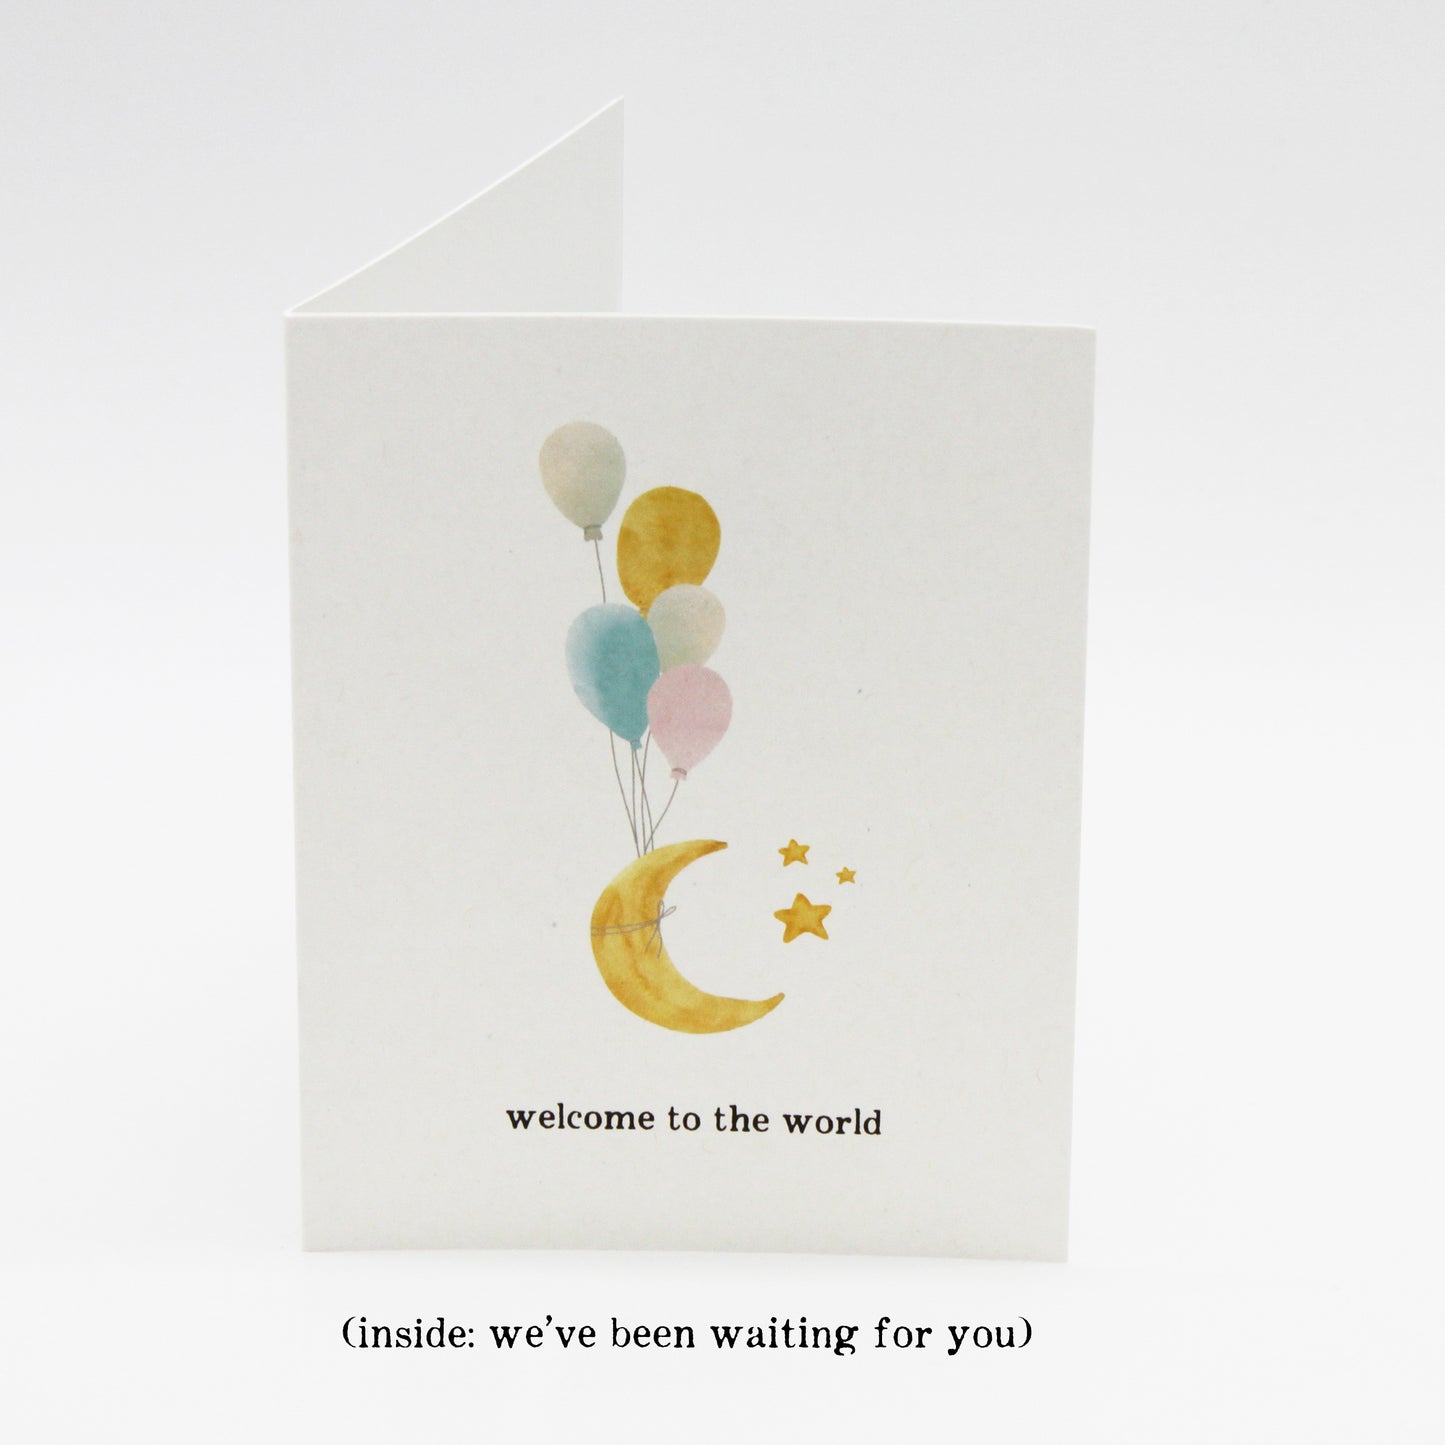 Baby Shower / Congratulations Cards